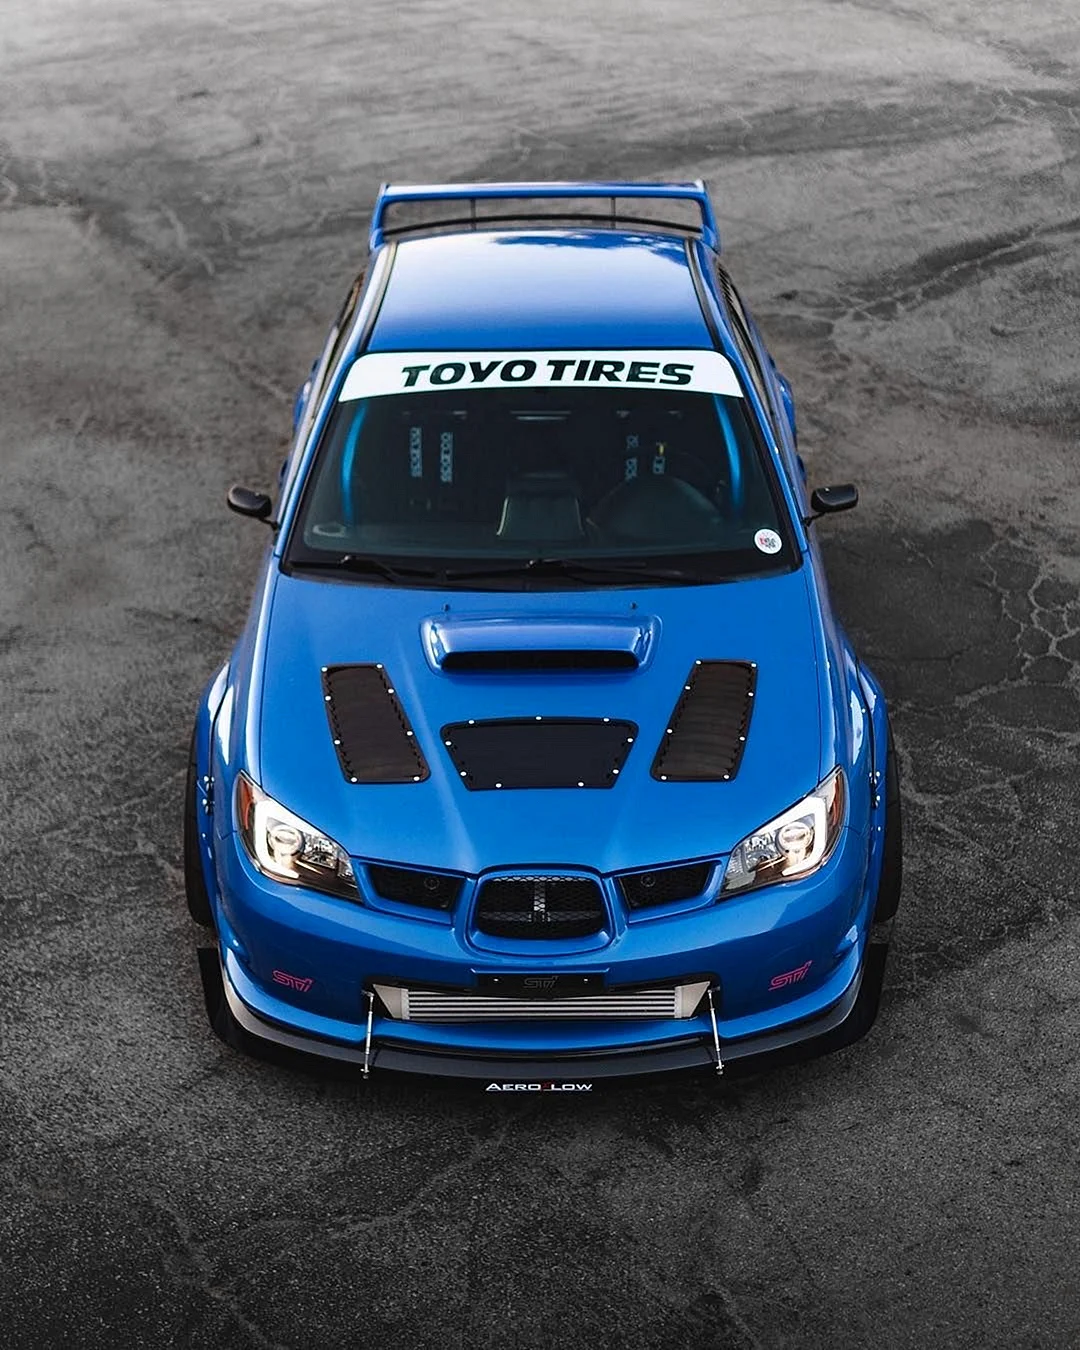 Subaru Wrx Sti [Stage 2] Wide Body Kit By Hycade Wallpaper For iPhone